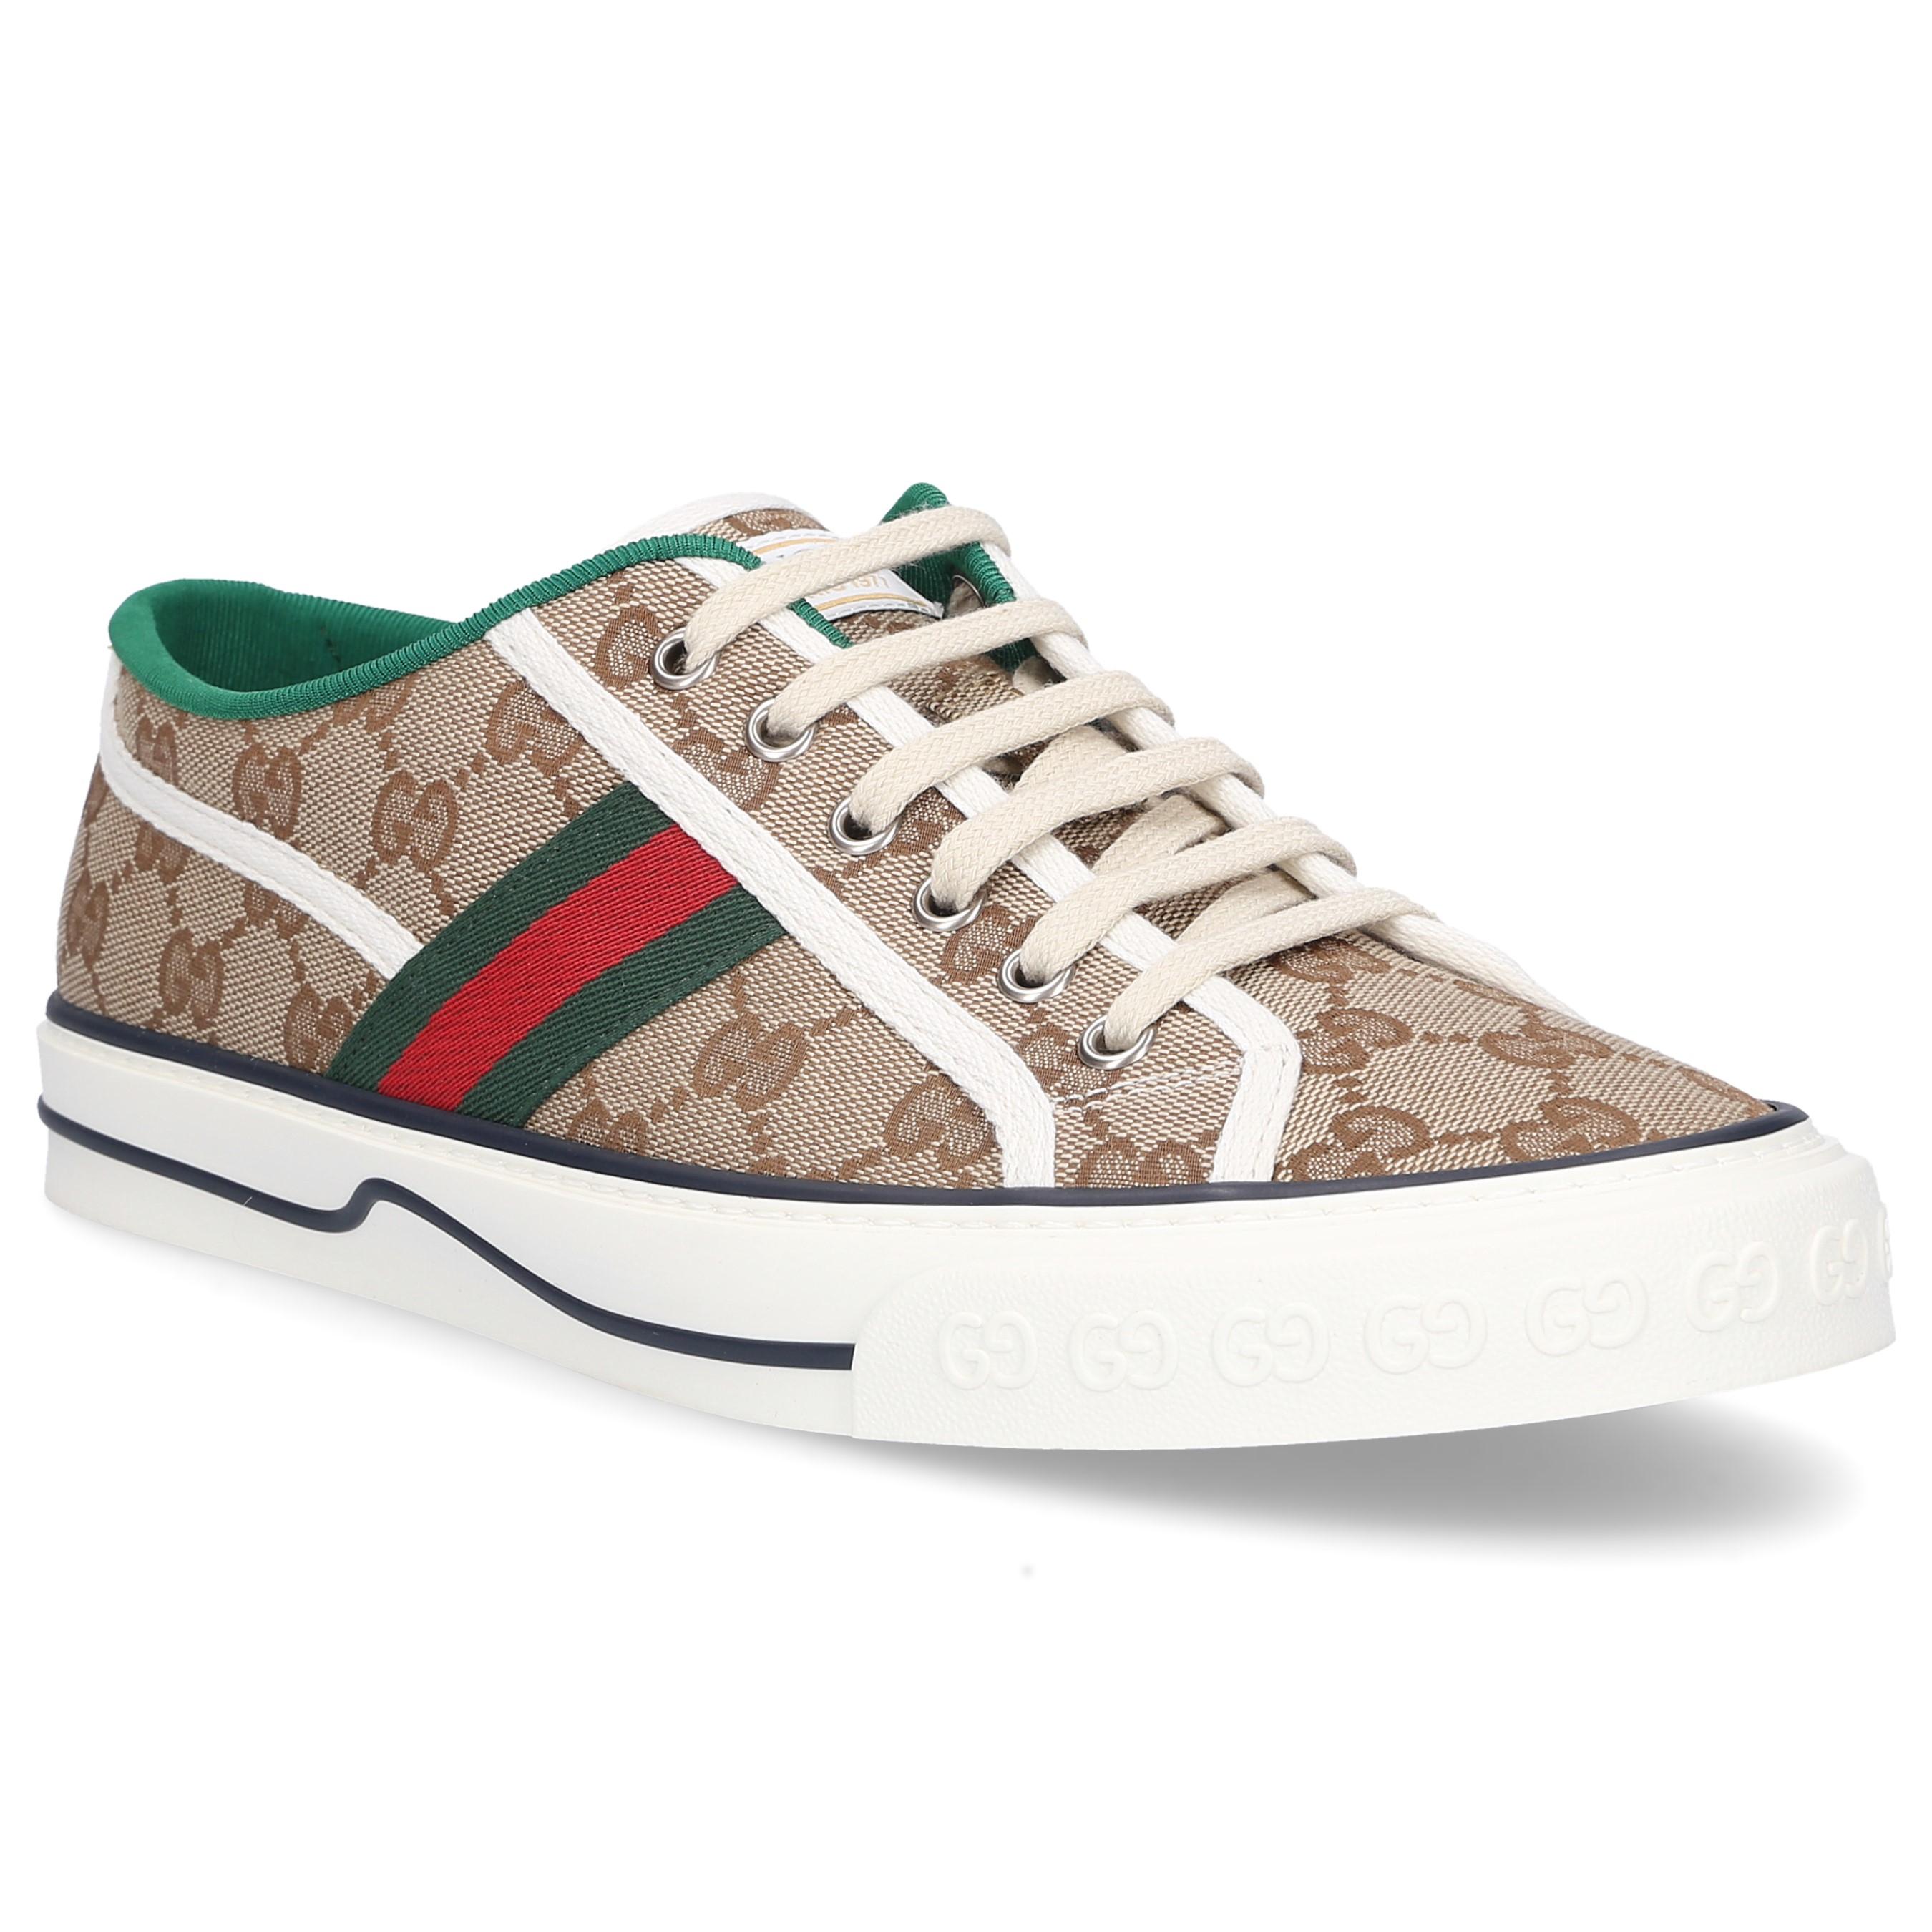 Gucci Canvas Sneakers Beige Tennis 1977 in Natural for Men - Lyst